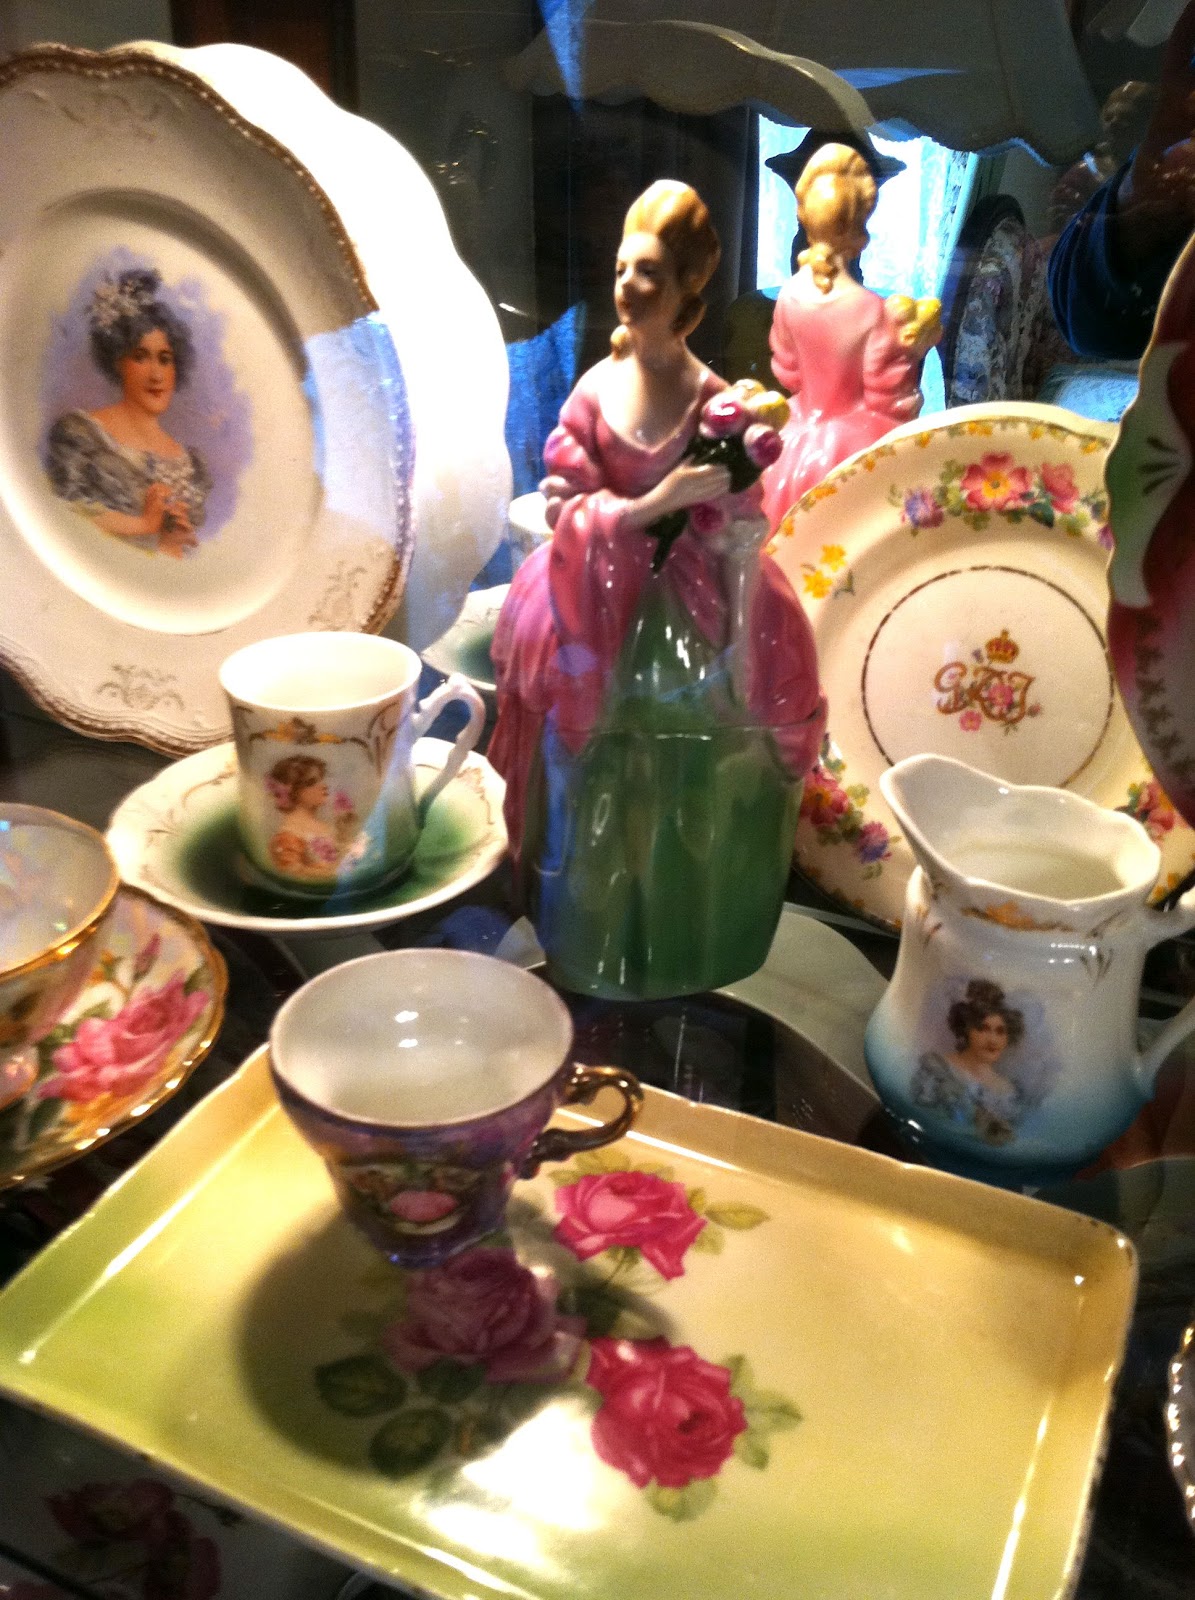 The Thrift Shop Romantic: Treasure Box Wednesday: the Alice in